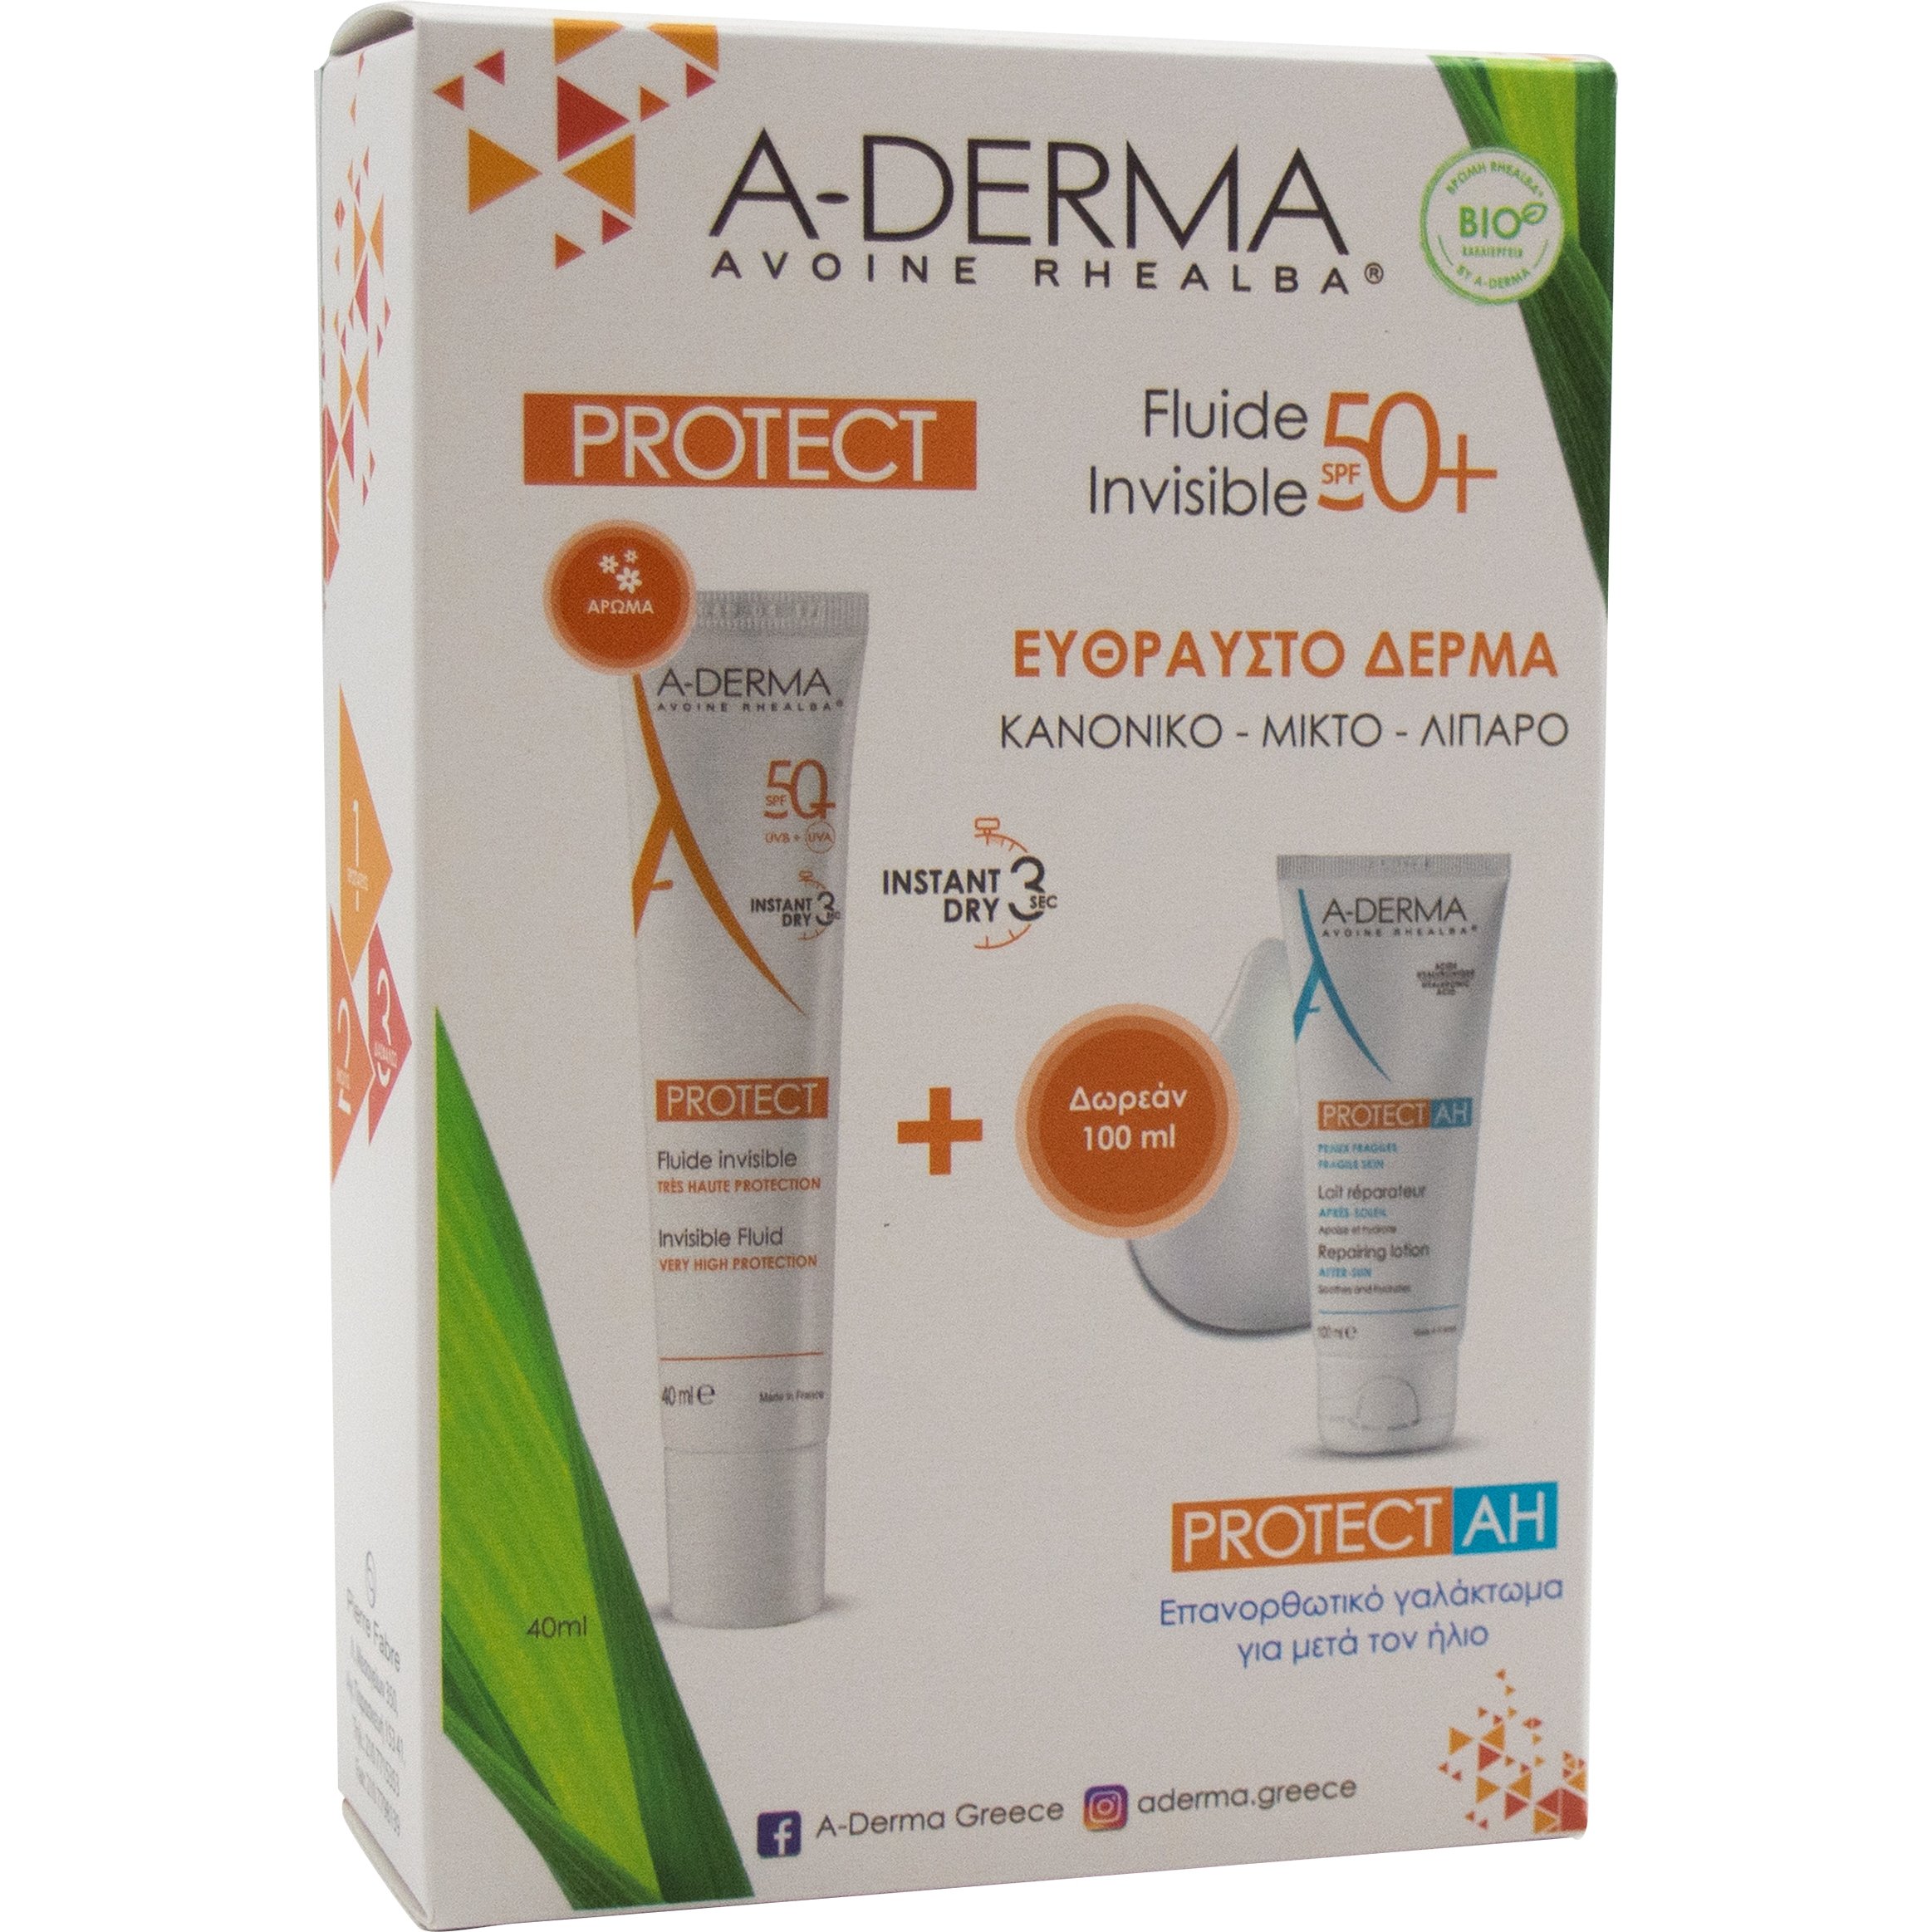 A-Derma Protect Fluide Invisible Λεπτόρρευστη Αντηλιακή Κρέμα Προσώπου Spf50+, 40ml...